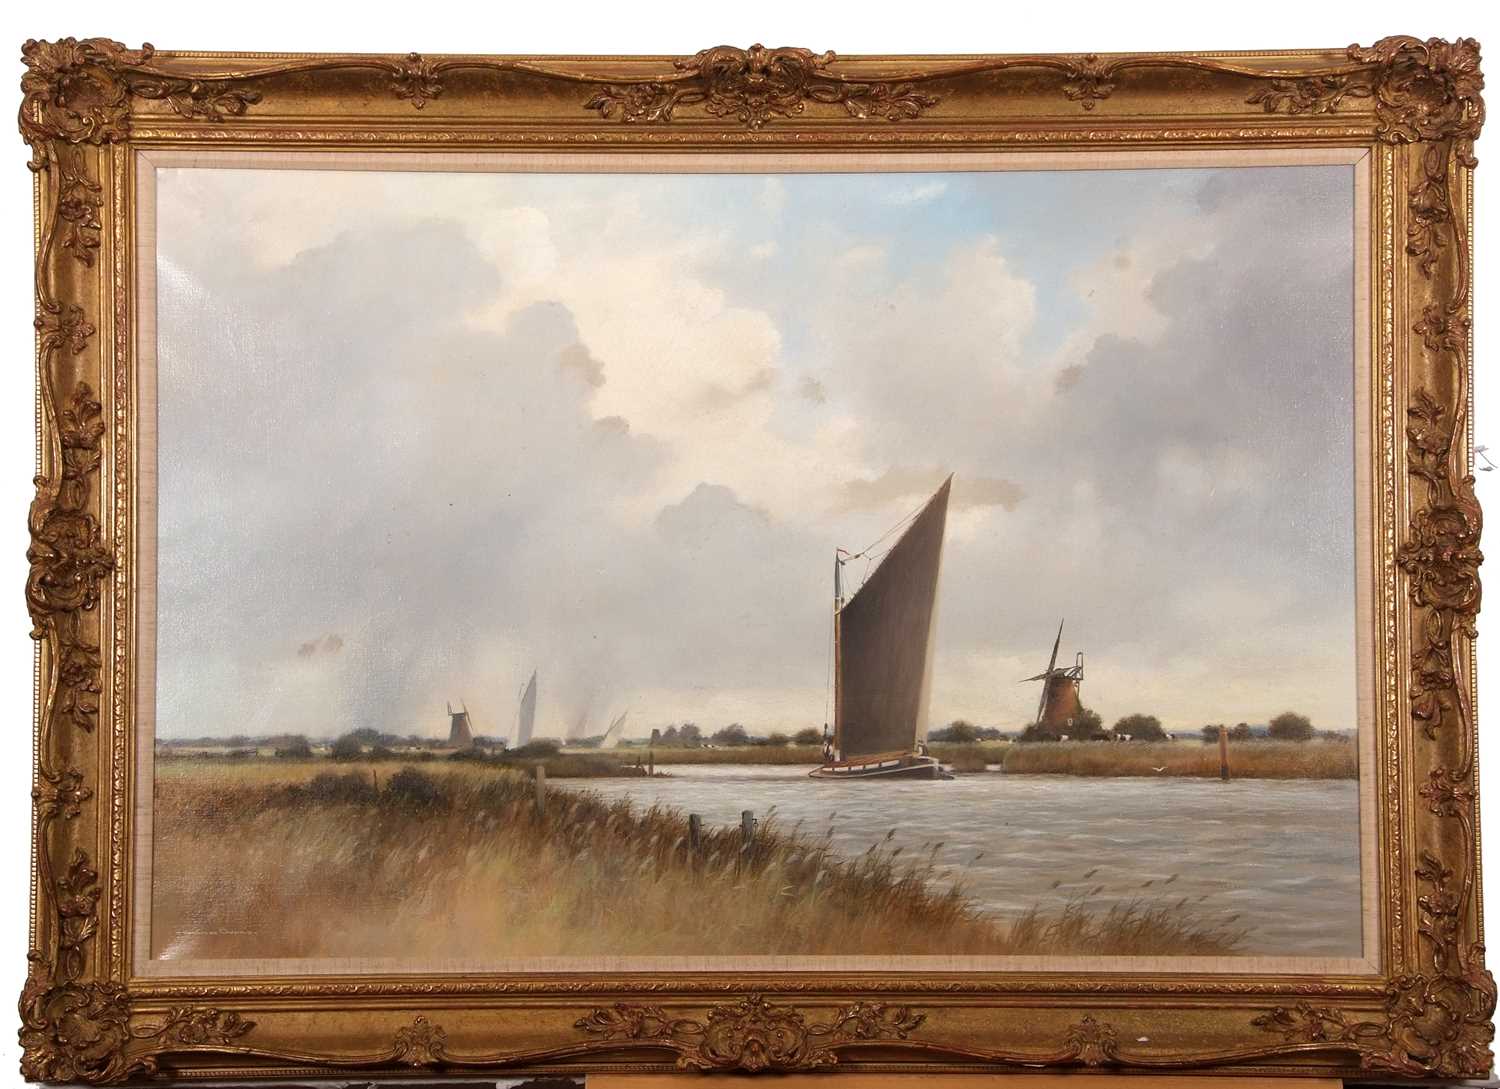 Colin Burns (British, b.1944), Broadland scene with wherry, oil on canvas, signed, 59x90cm, framed. - Image 2 of 3